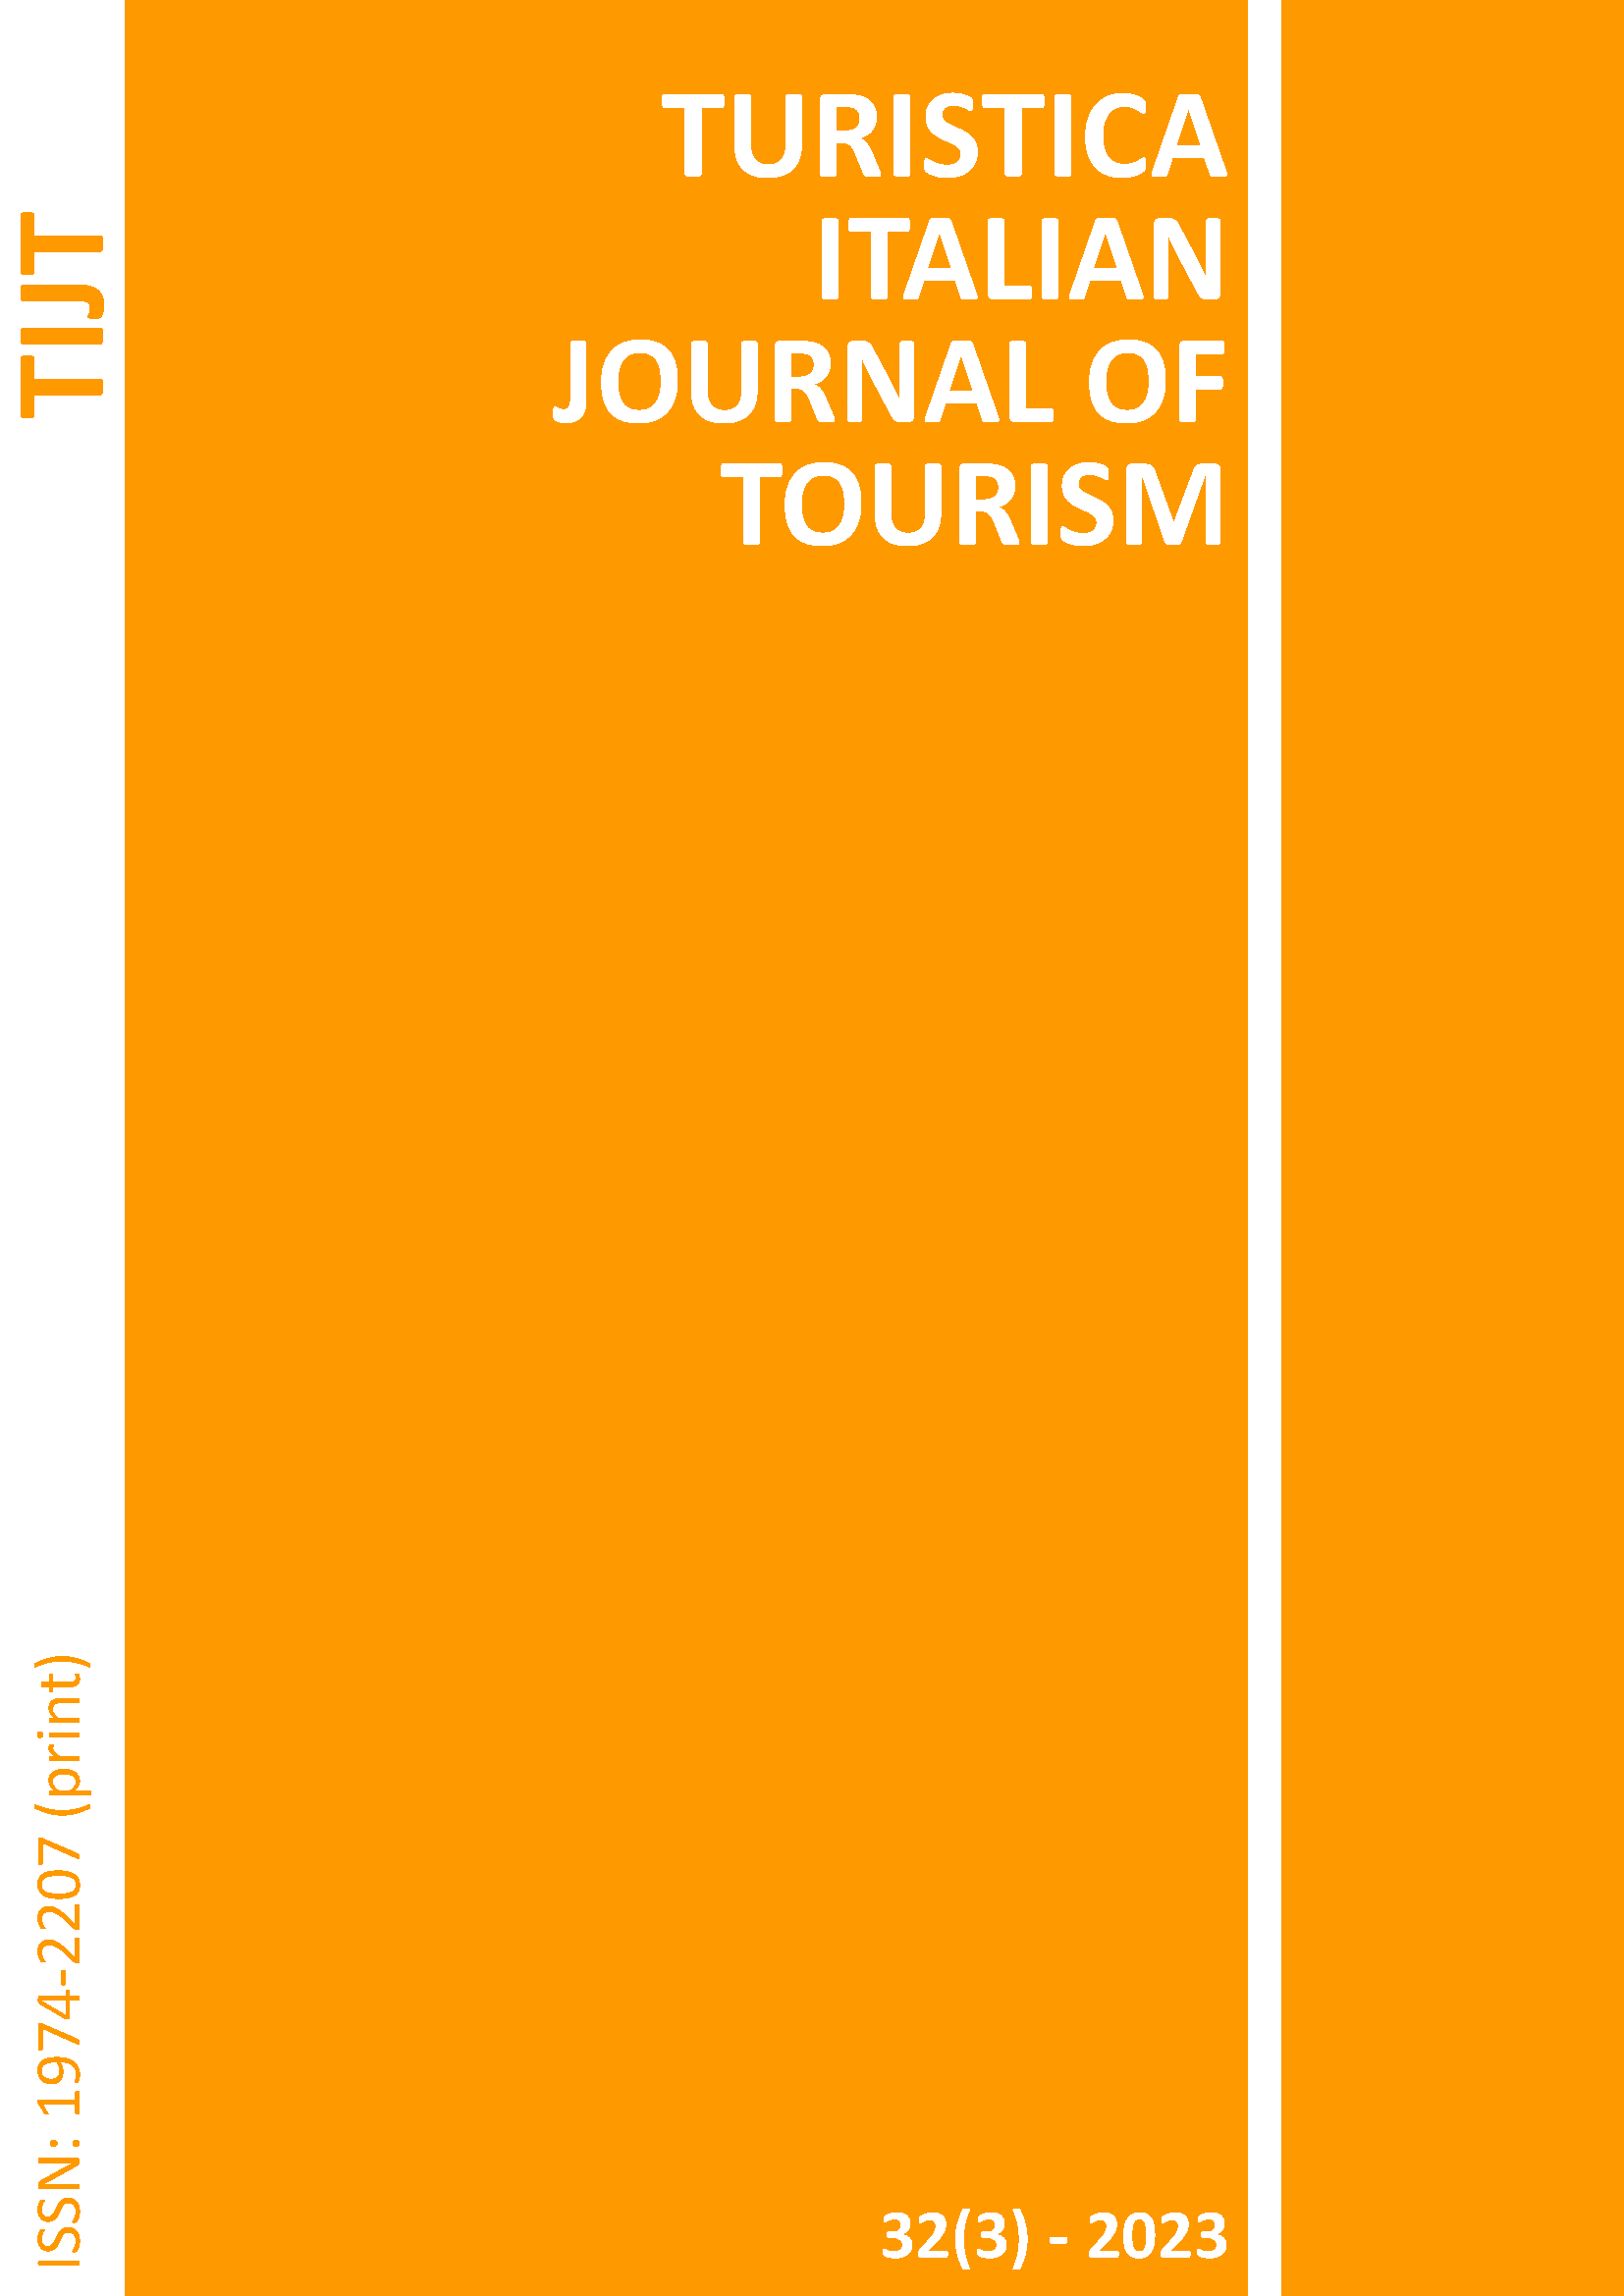 					View Vol. 32 No. 3 (2023): TURISTICA - ITALIAN JOURNAL OF TOURISM. VOLUME 32, ISSUE 3
				